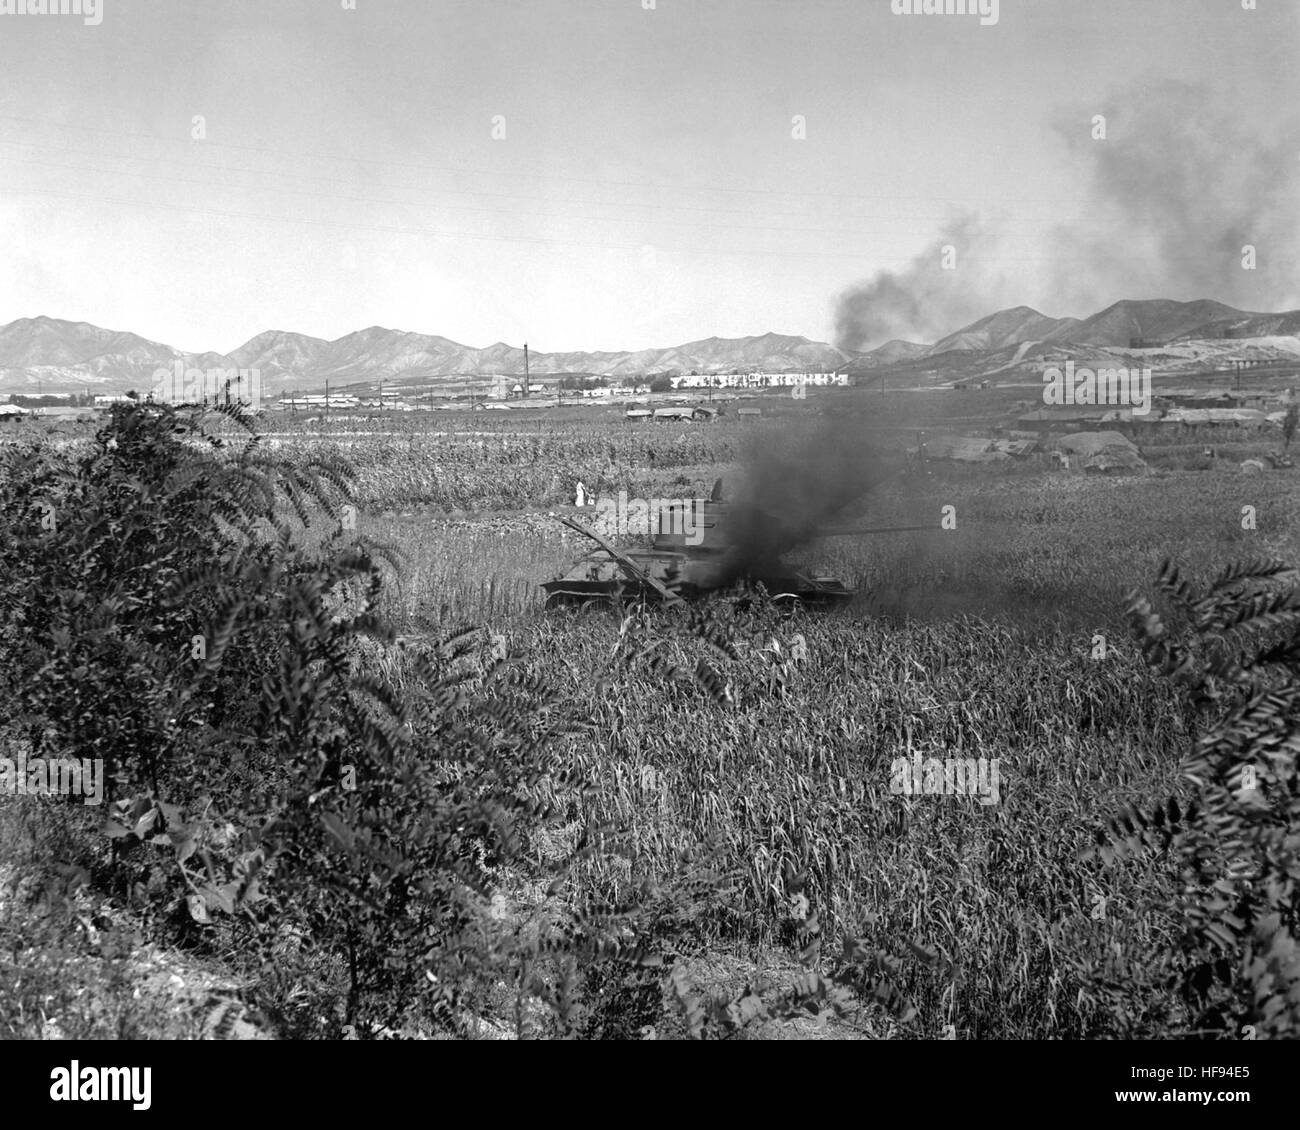 Russian T-34 tanks north of Inchon, knocked out and burning after U.S. Marines get hits on them.  Russian T-34 tank burns in field. NARA FILE #:  80-G-421167 Burning T-34-85 medium tank, destroyed by U.S. Marines, north of Inchon Stock Photo